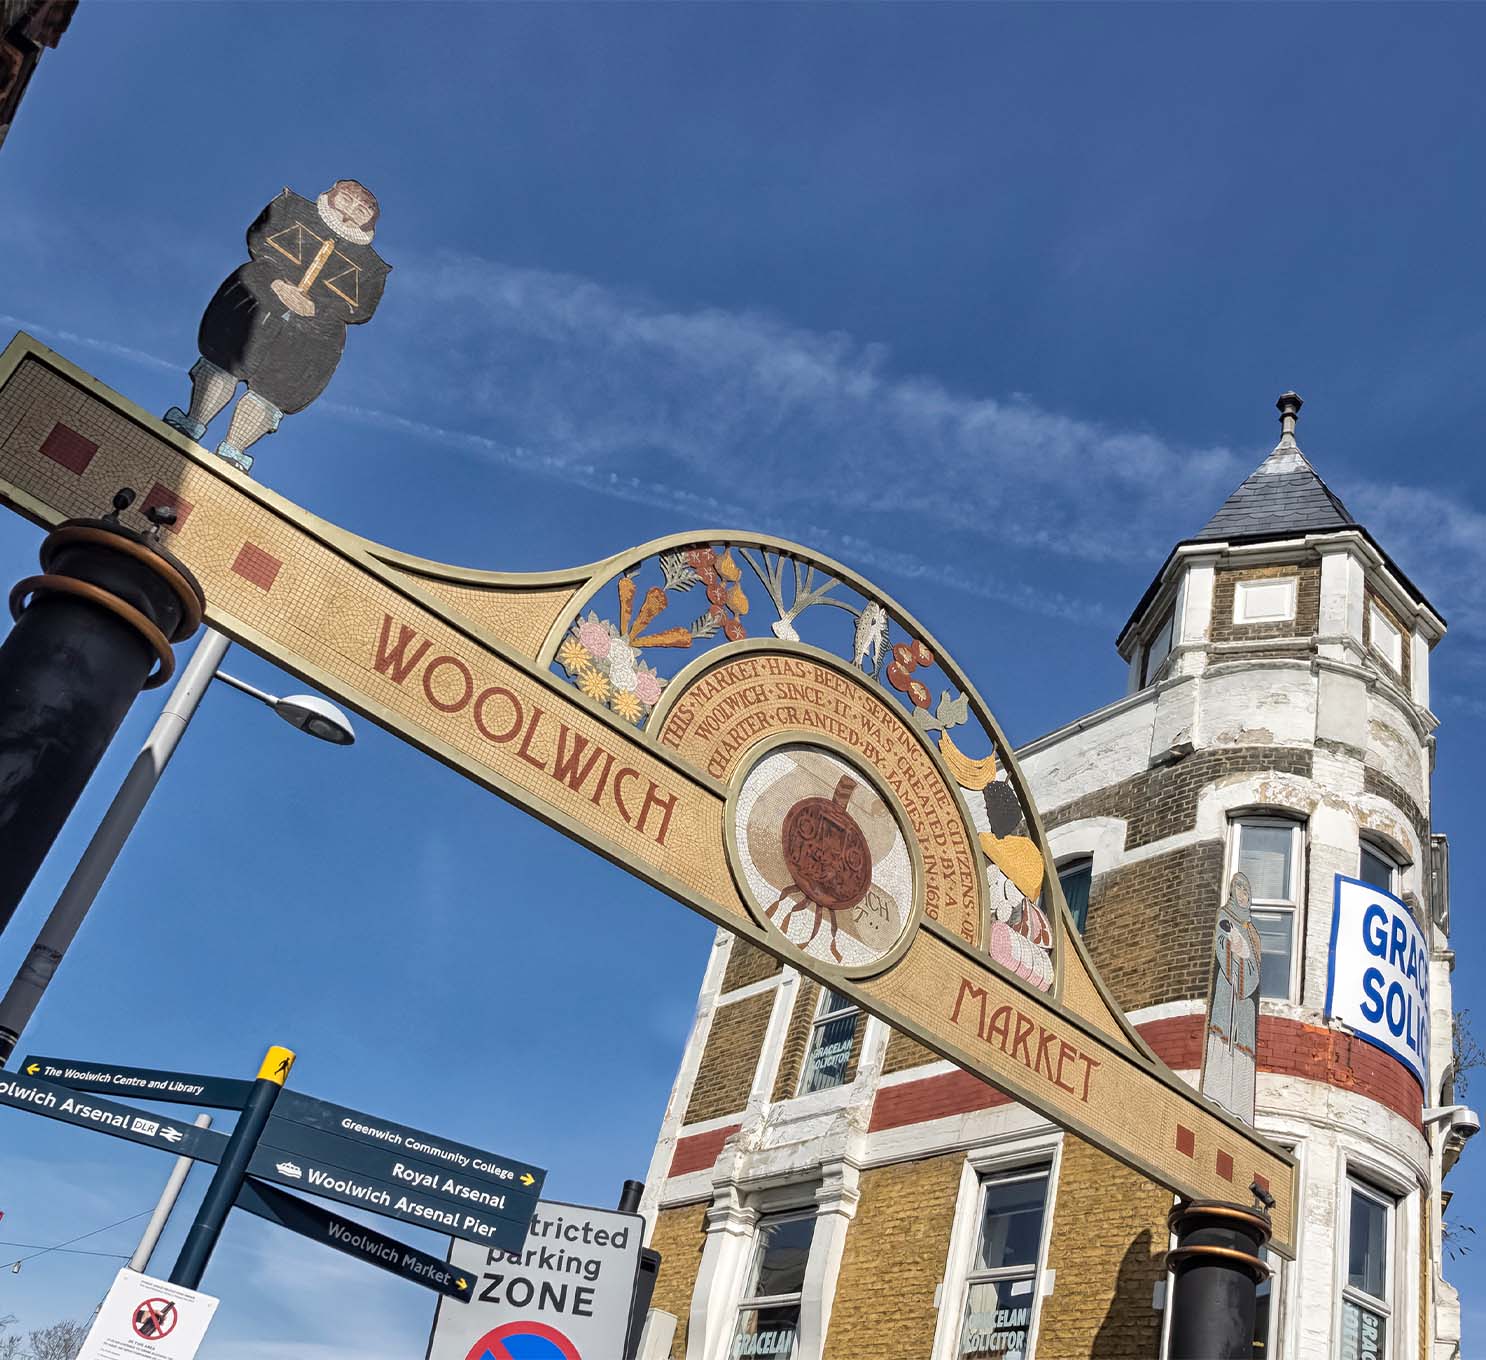 Ornate sign above the market on Beresford Street in Woolwich